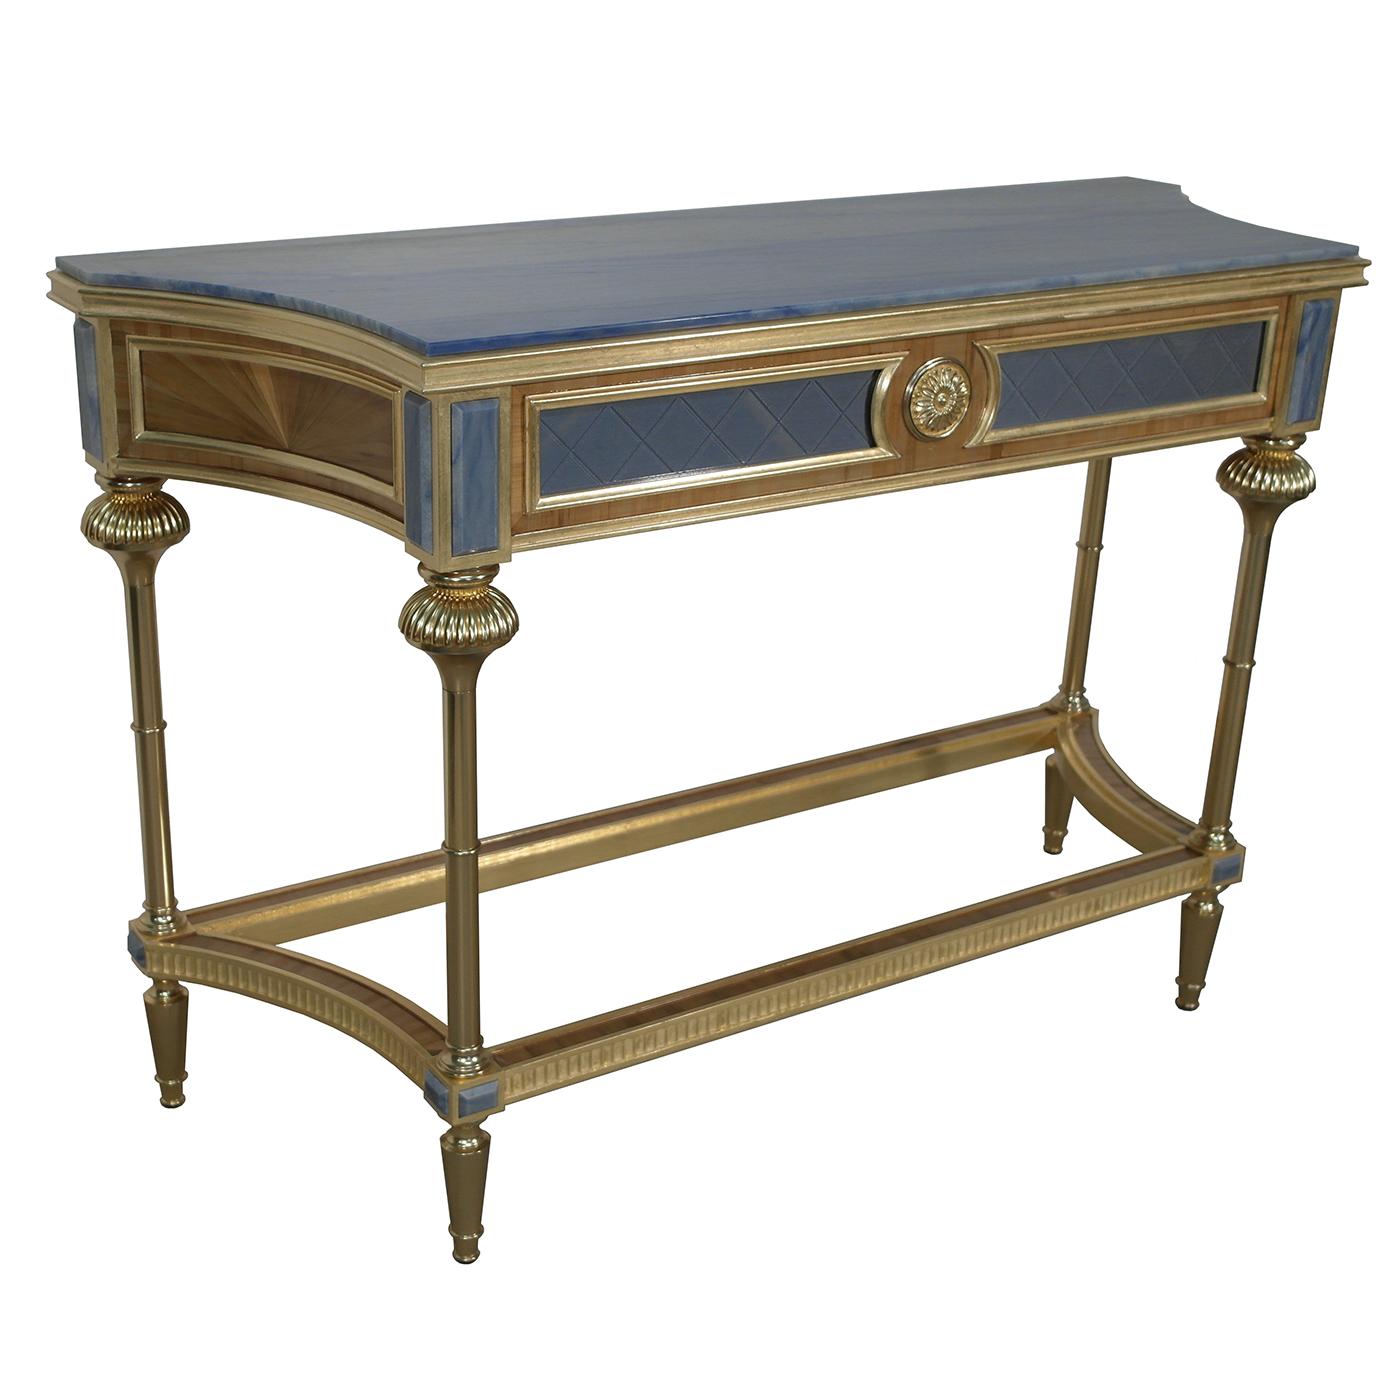 This opulent wooden console table combines natural straw veneer details with 22-karat gold-plated brass accents. The 22-karat gold leaf details boast a white patina treatment for a vintage look. The front is upholstered in blue silk, topped with